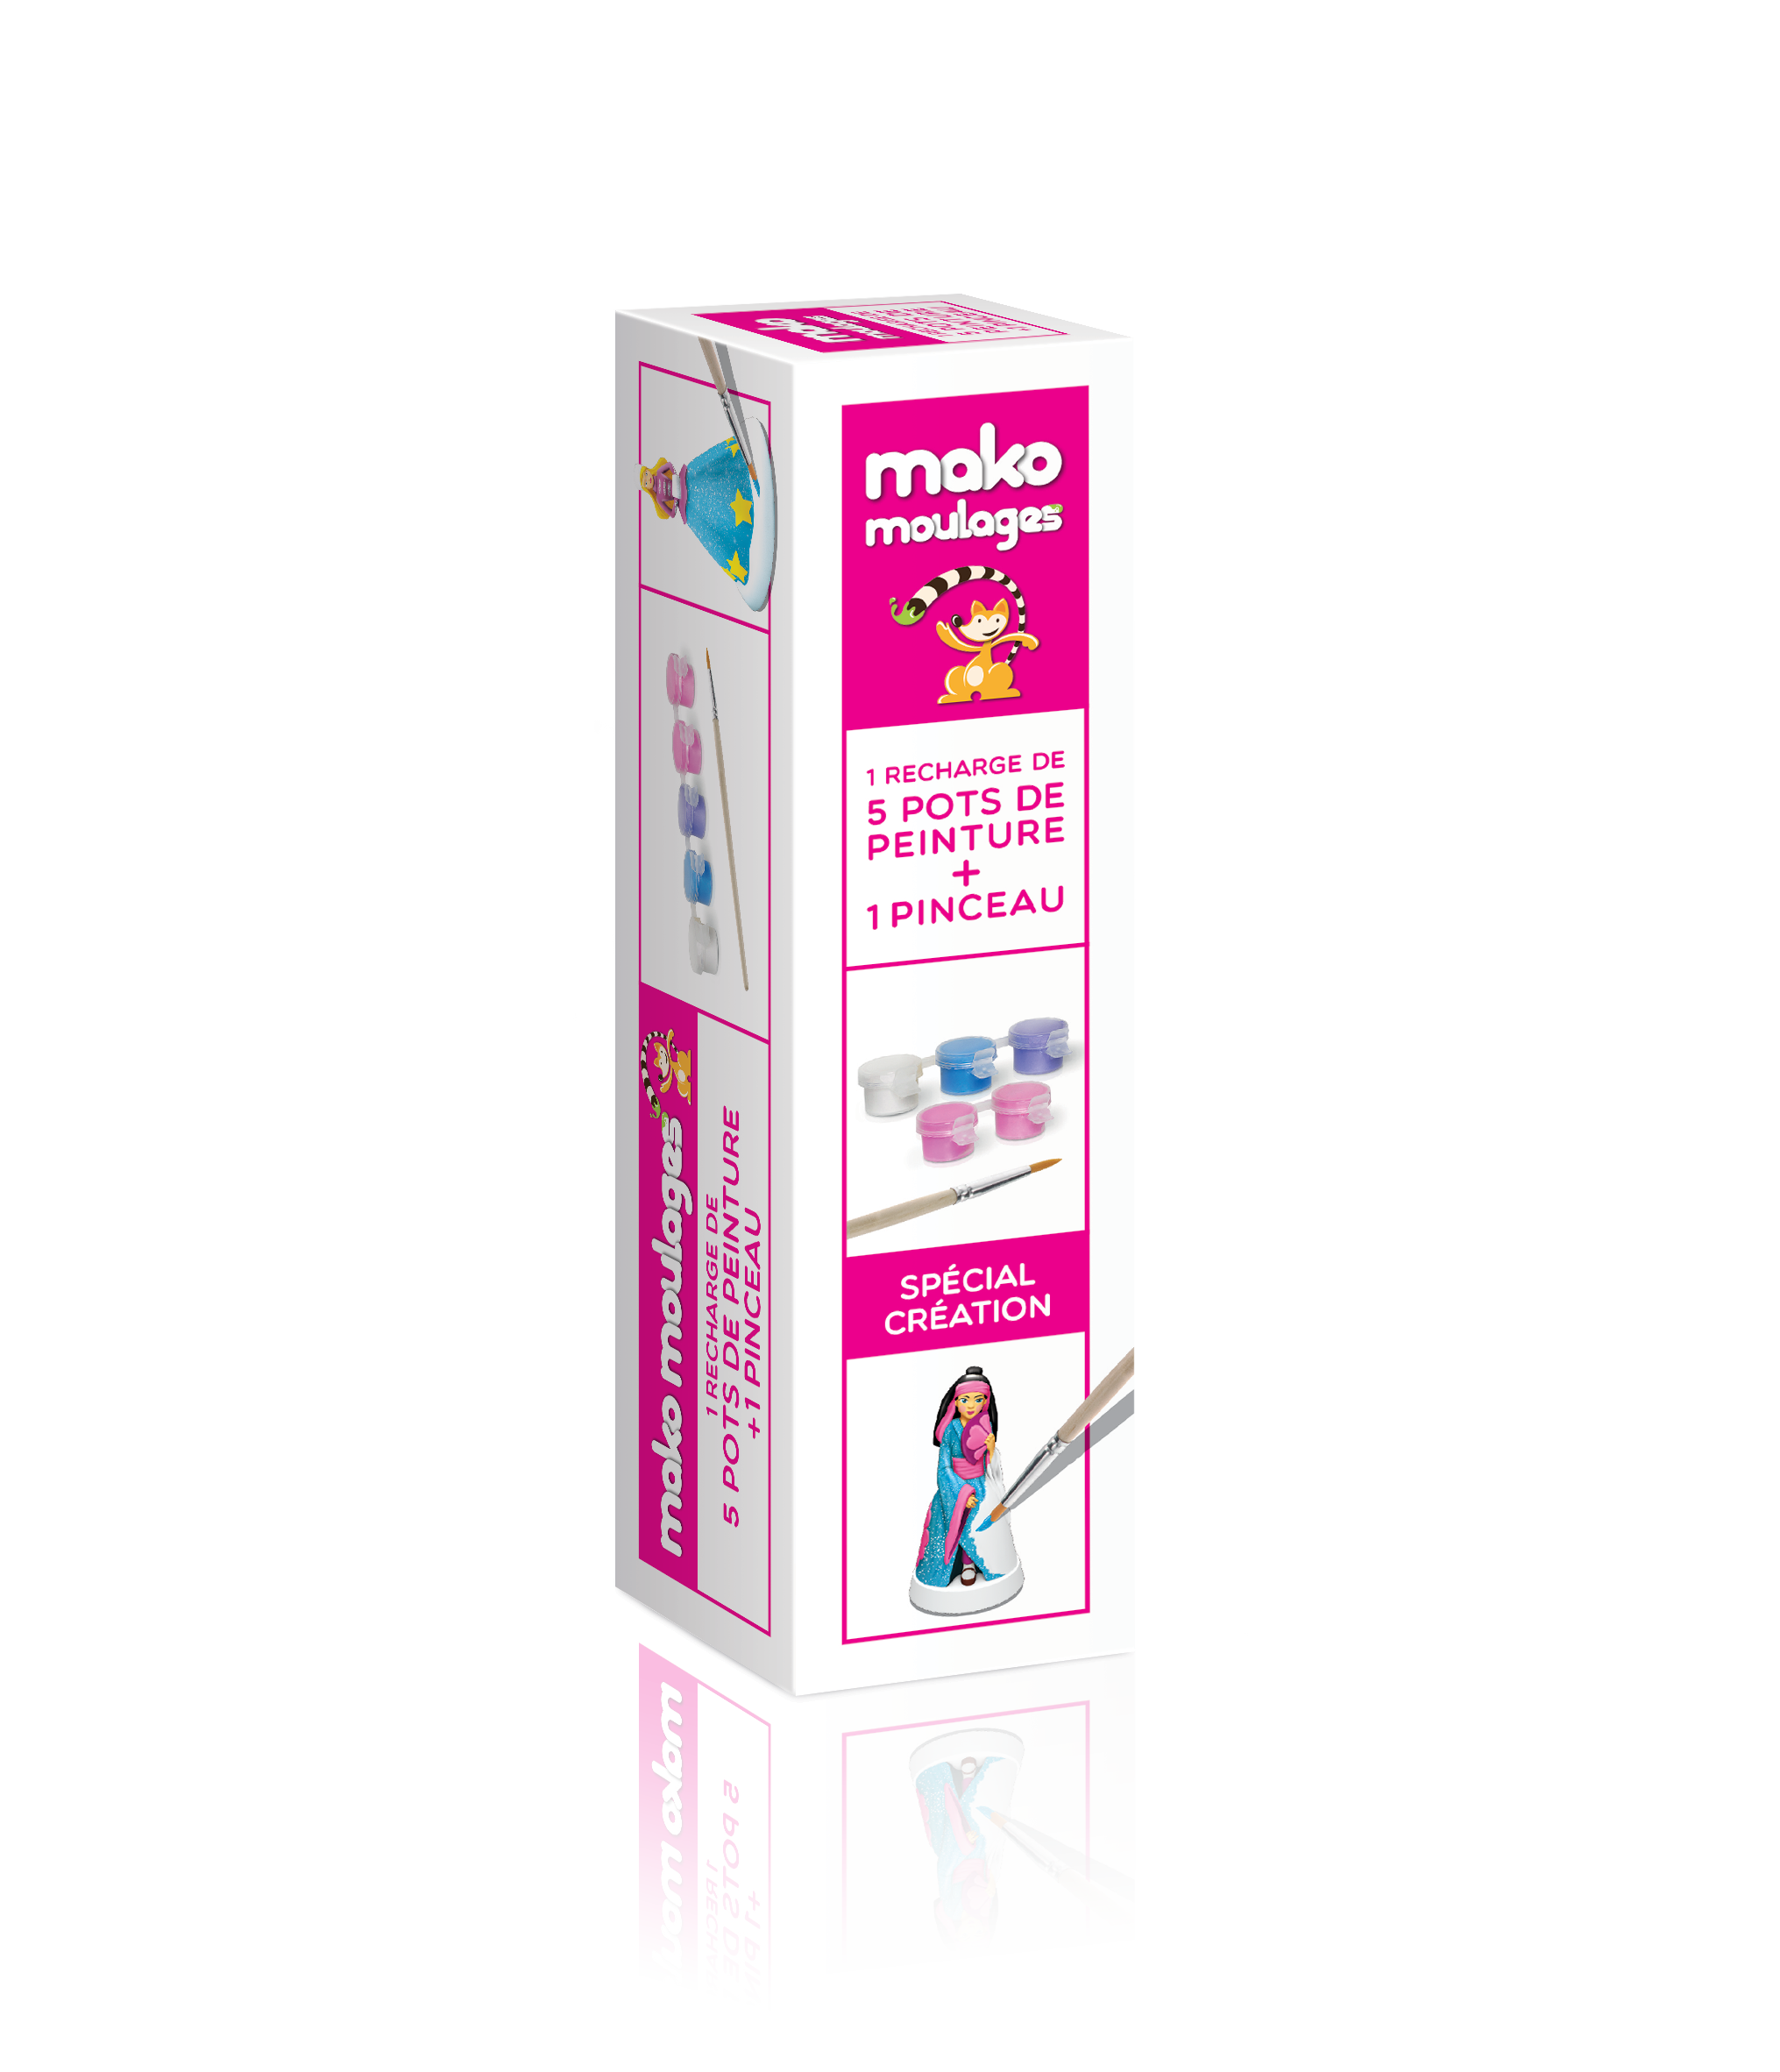 Recharge de peinture Girly - Made in France - Mako Moulages